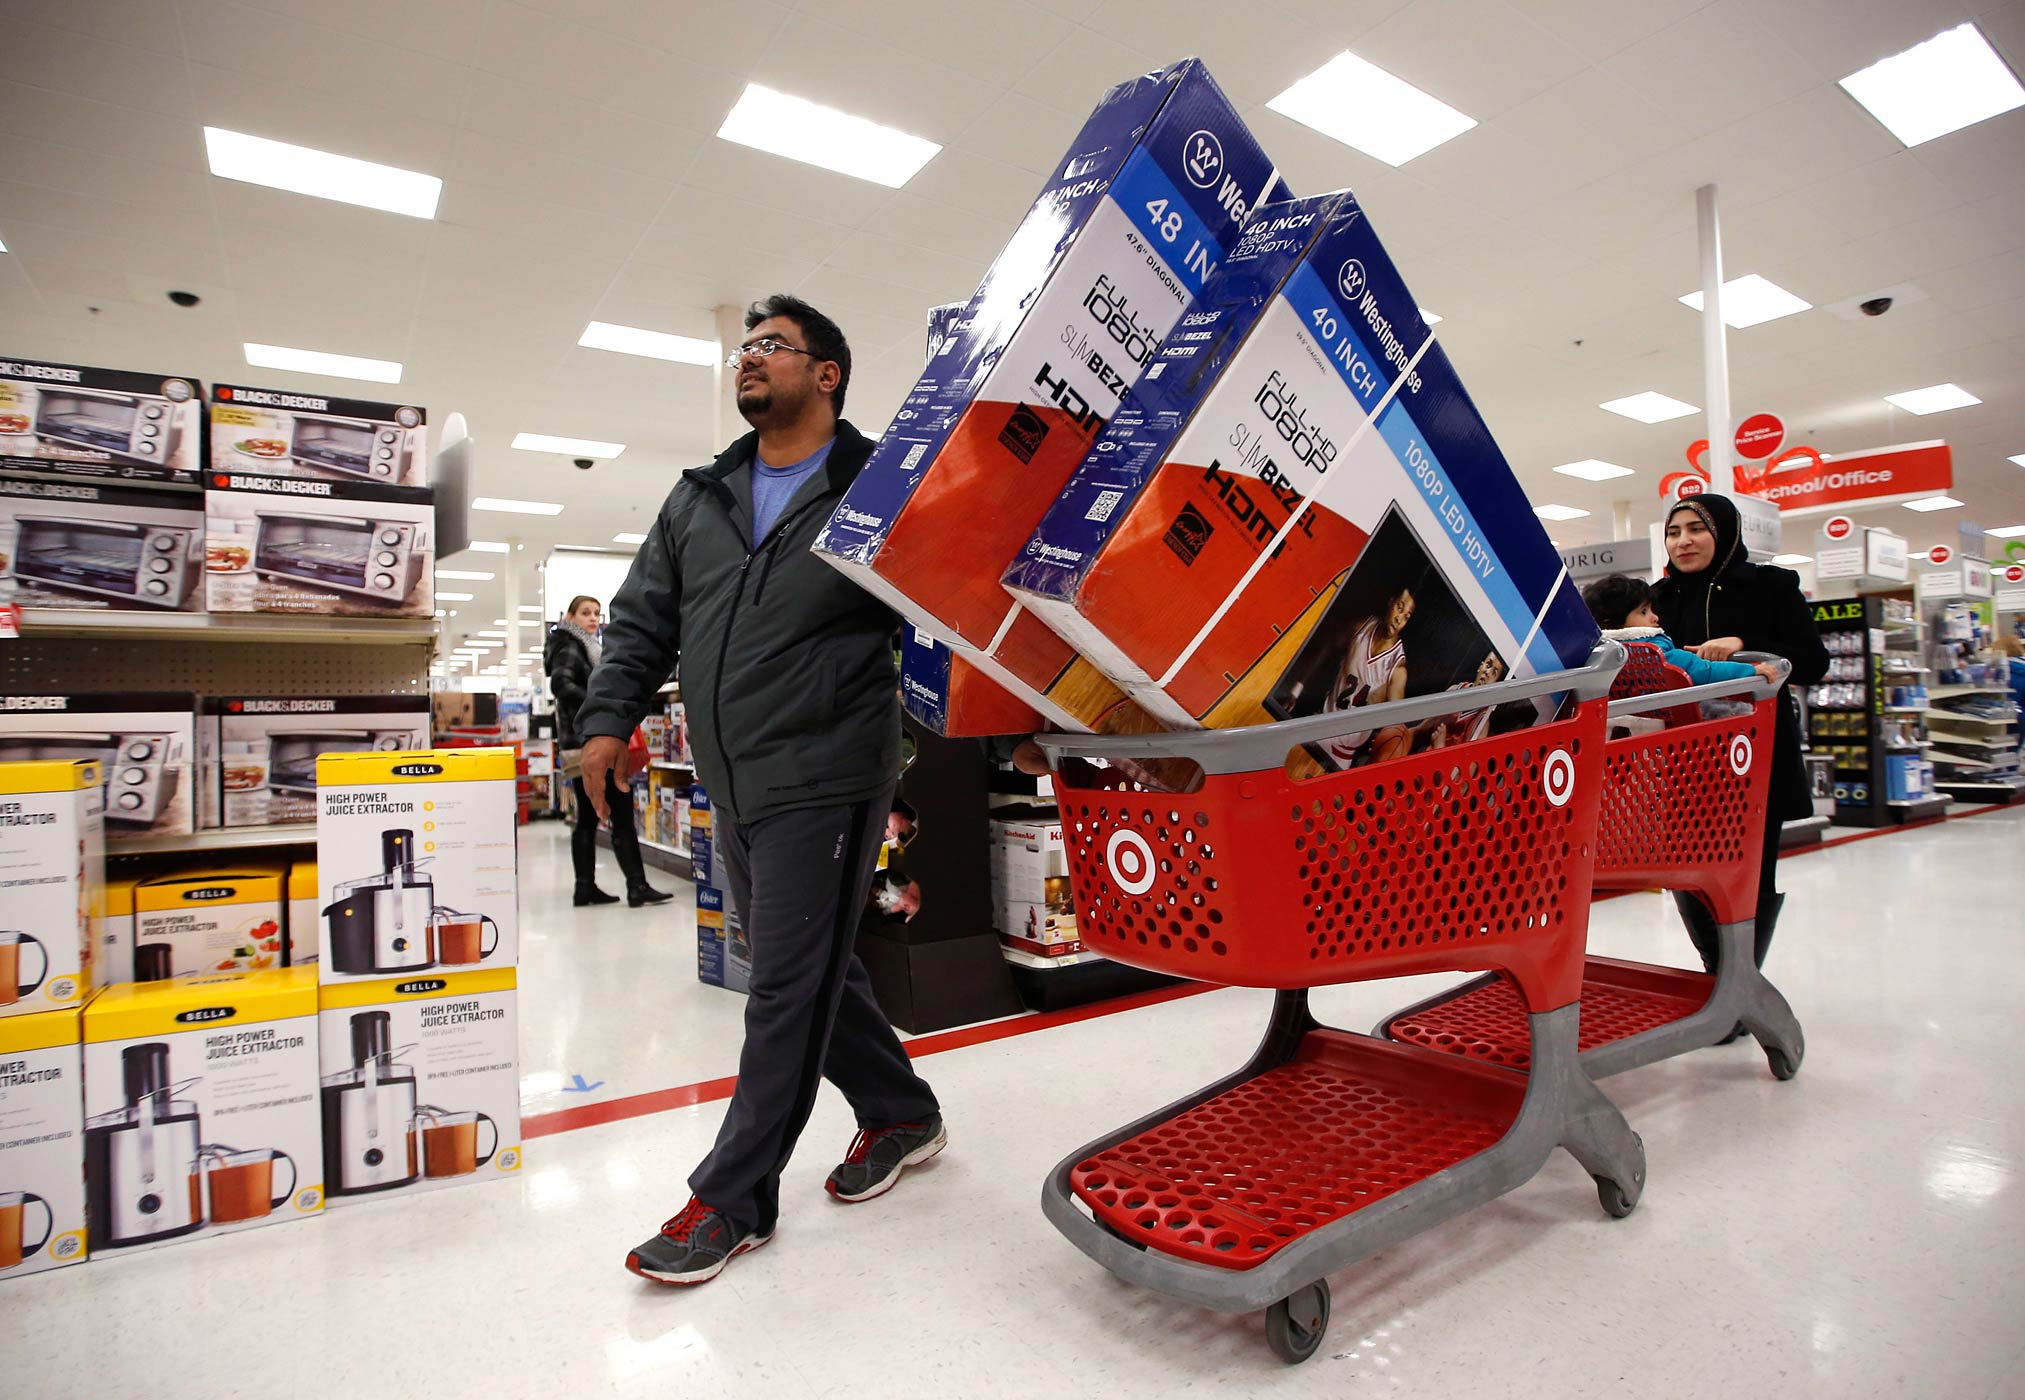 Shoppers patronize a Target store just after midnight on Black Friday, Nov. 28, 2014, in South Portland, Maine. (Robert F. Bukaty—AP)